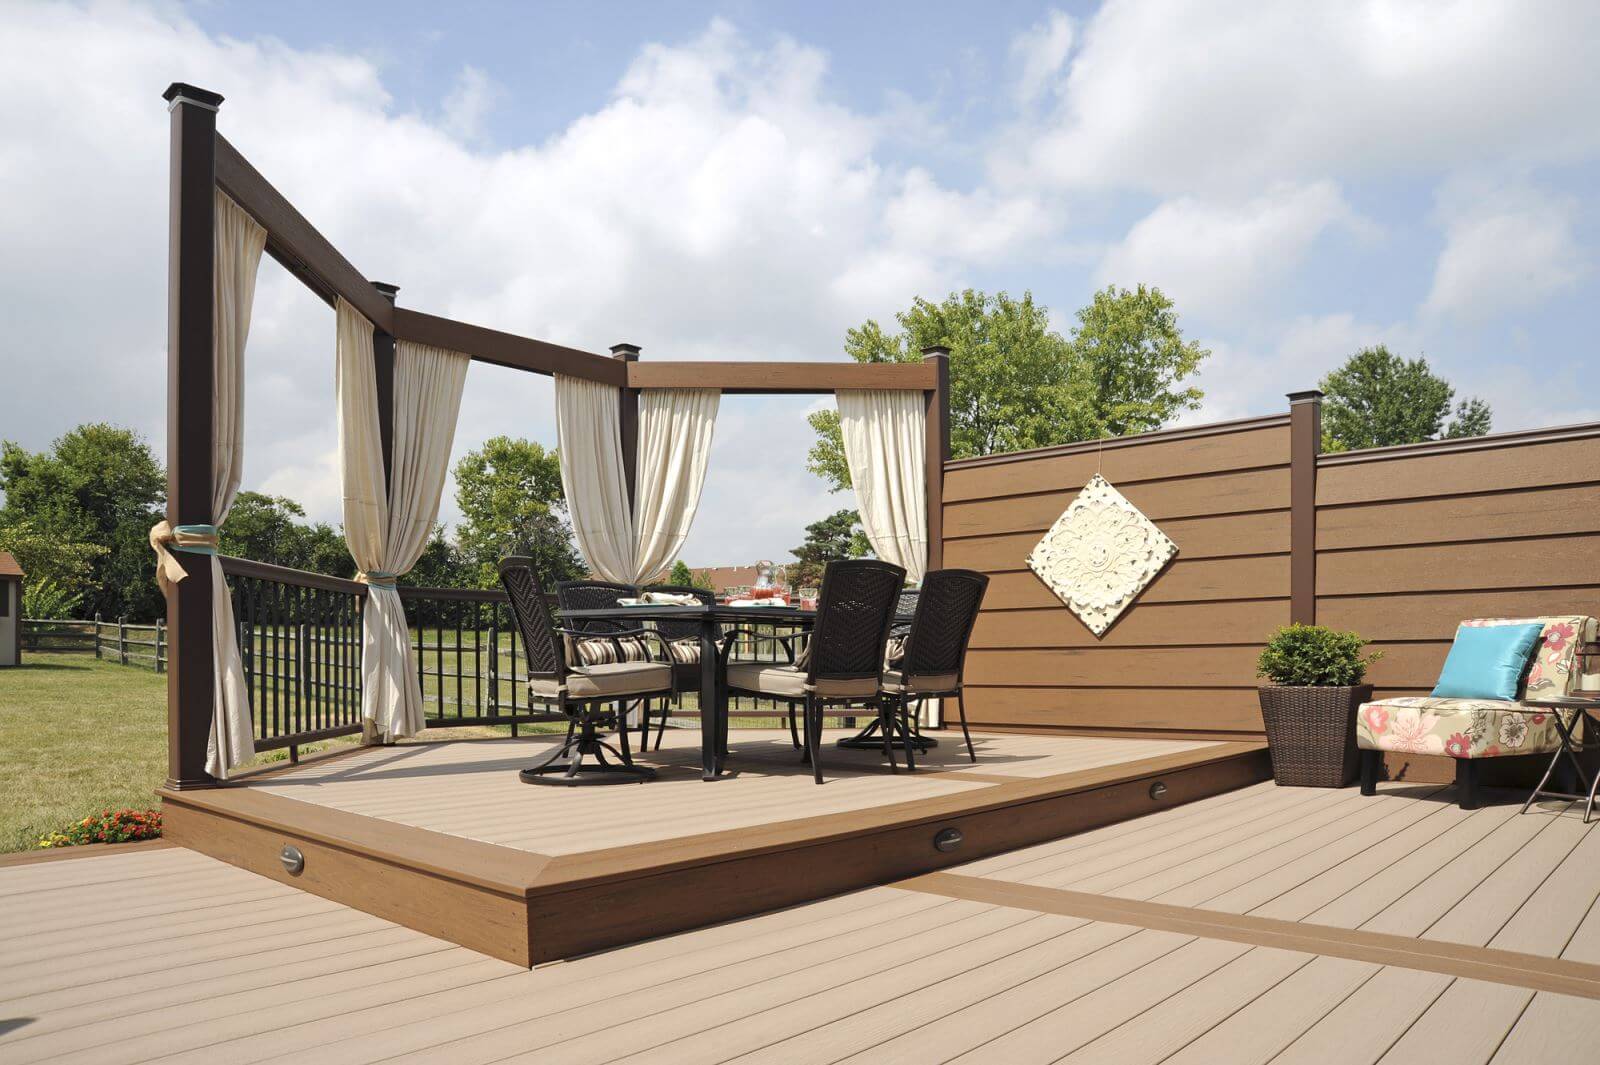 TimberTech Earthwood deck material in Sandy Birch with outdoor furniture